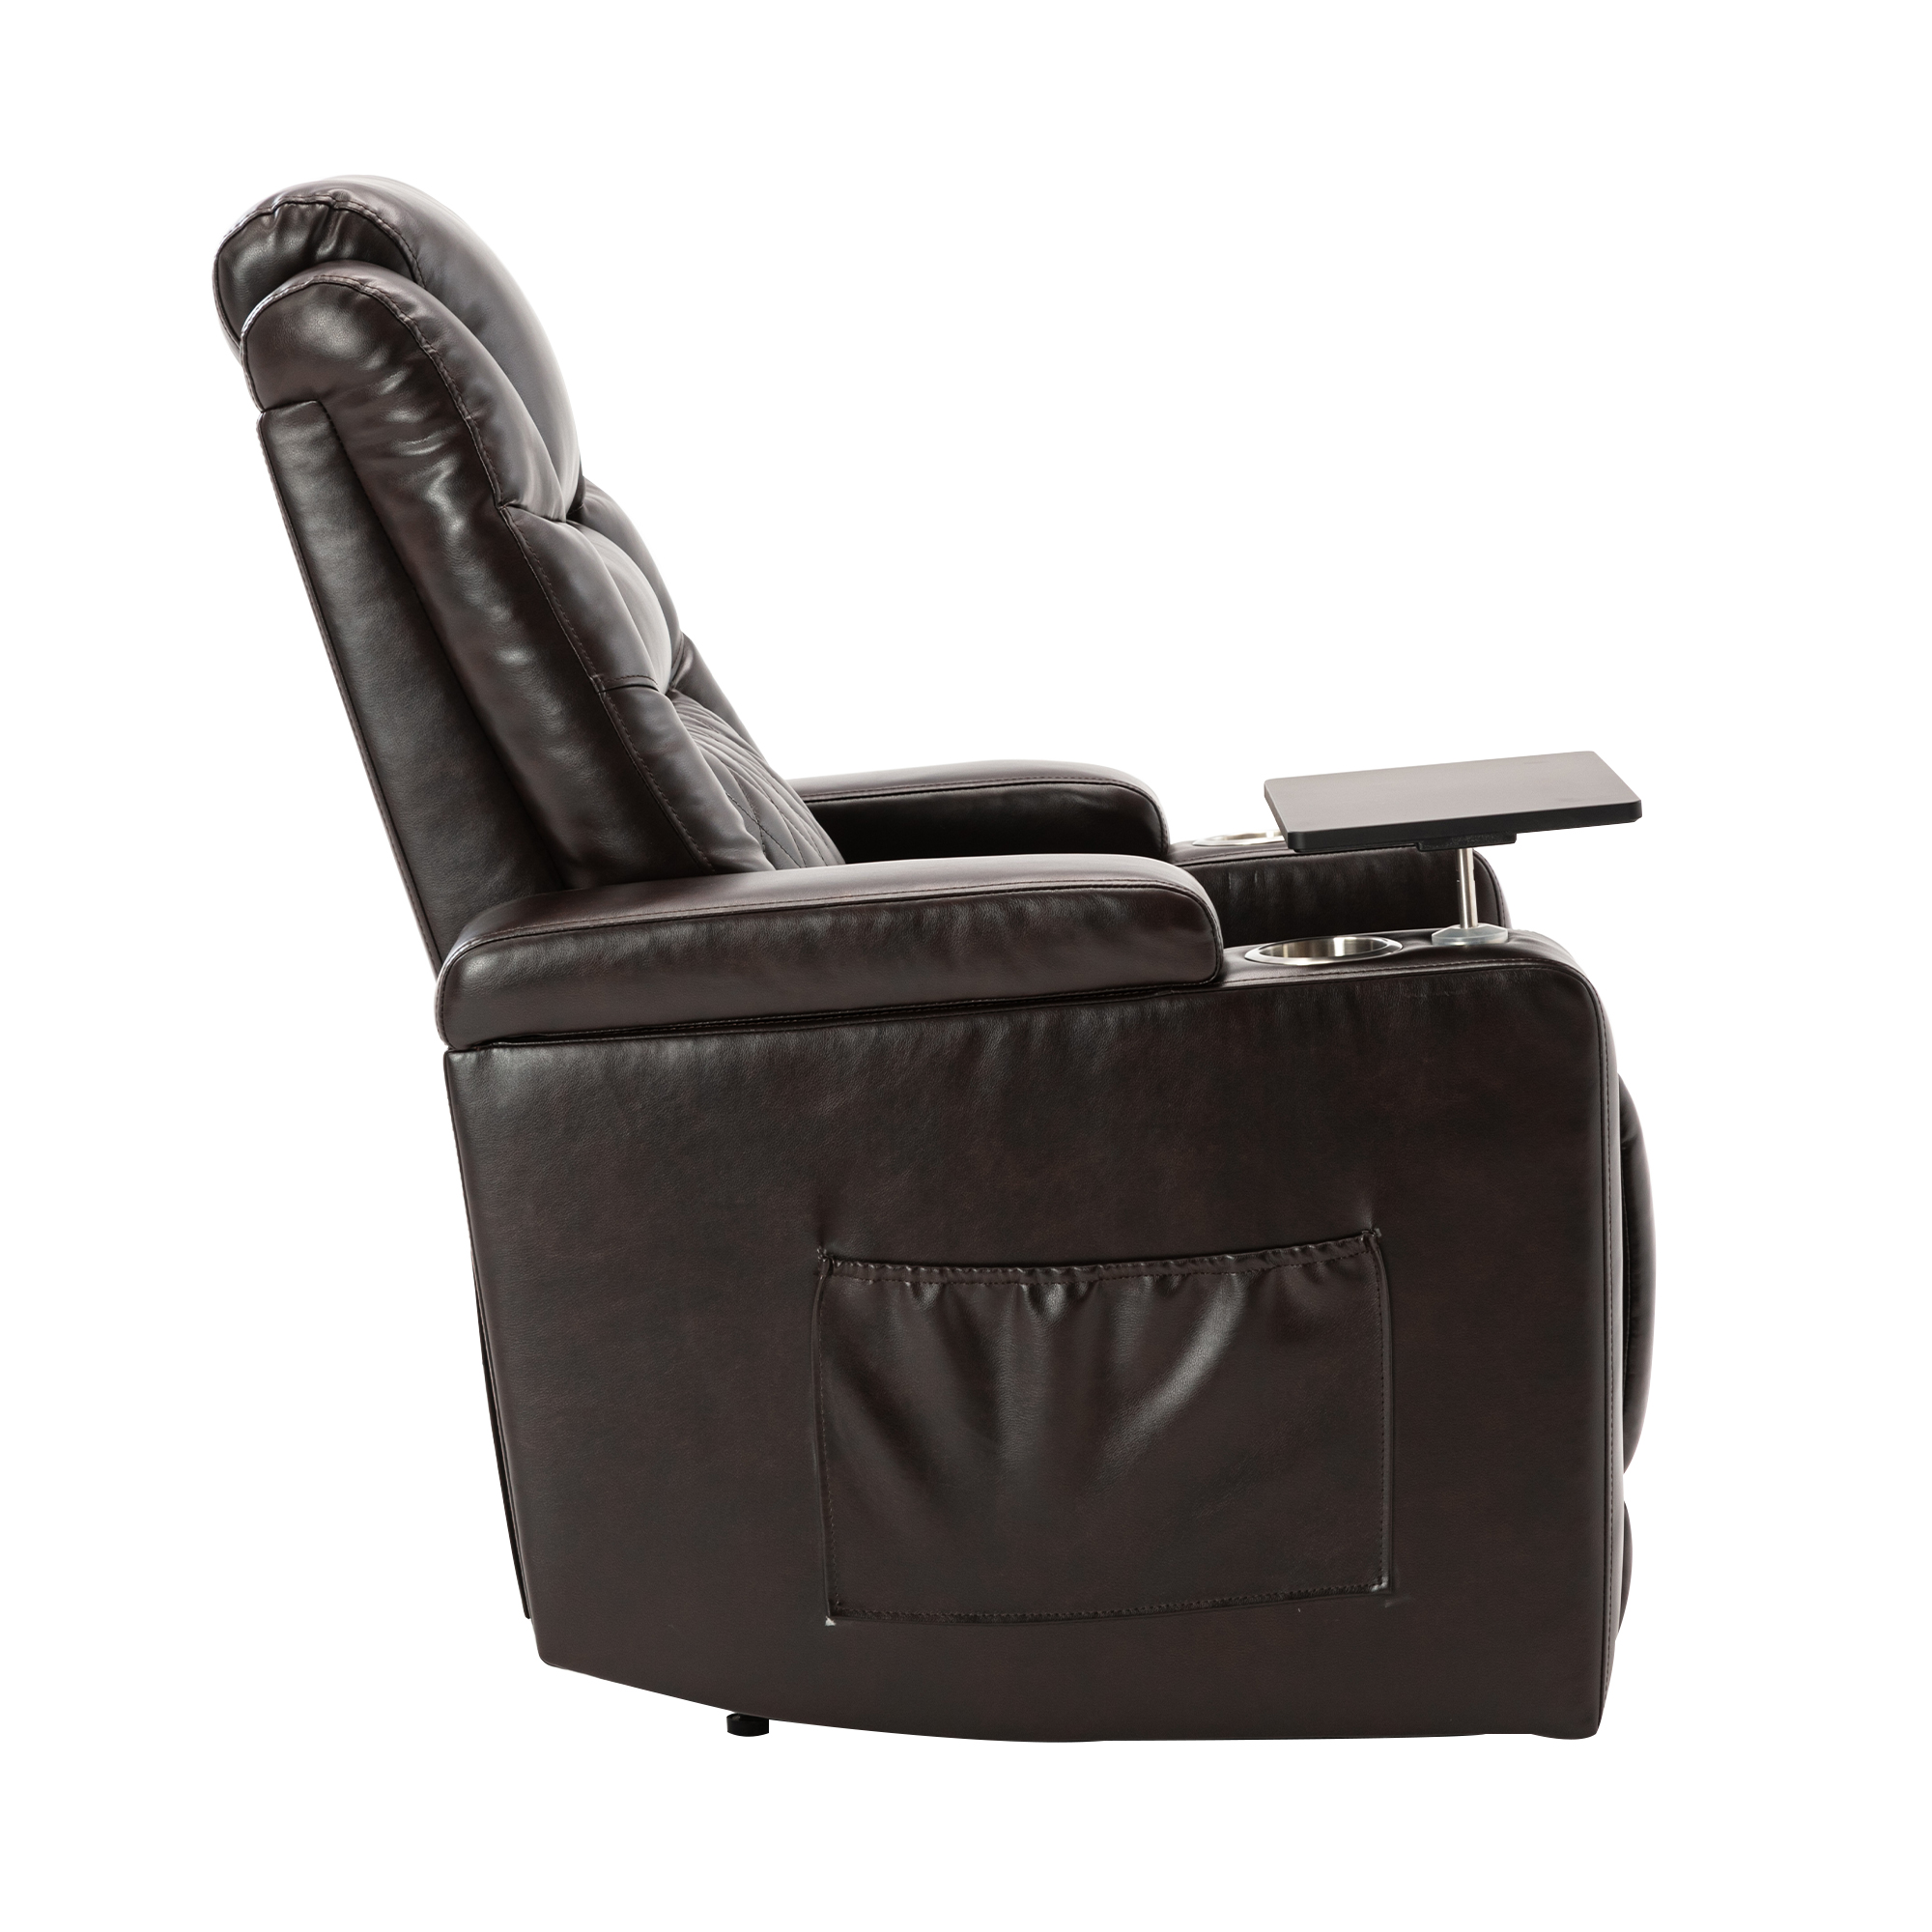 Power Recliner Sofa With USB Charging Port And Hidden Arm Storage, Brown - SG000440AAA